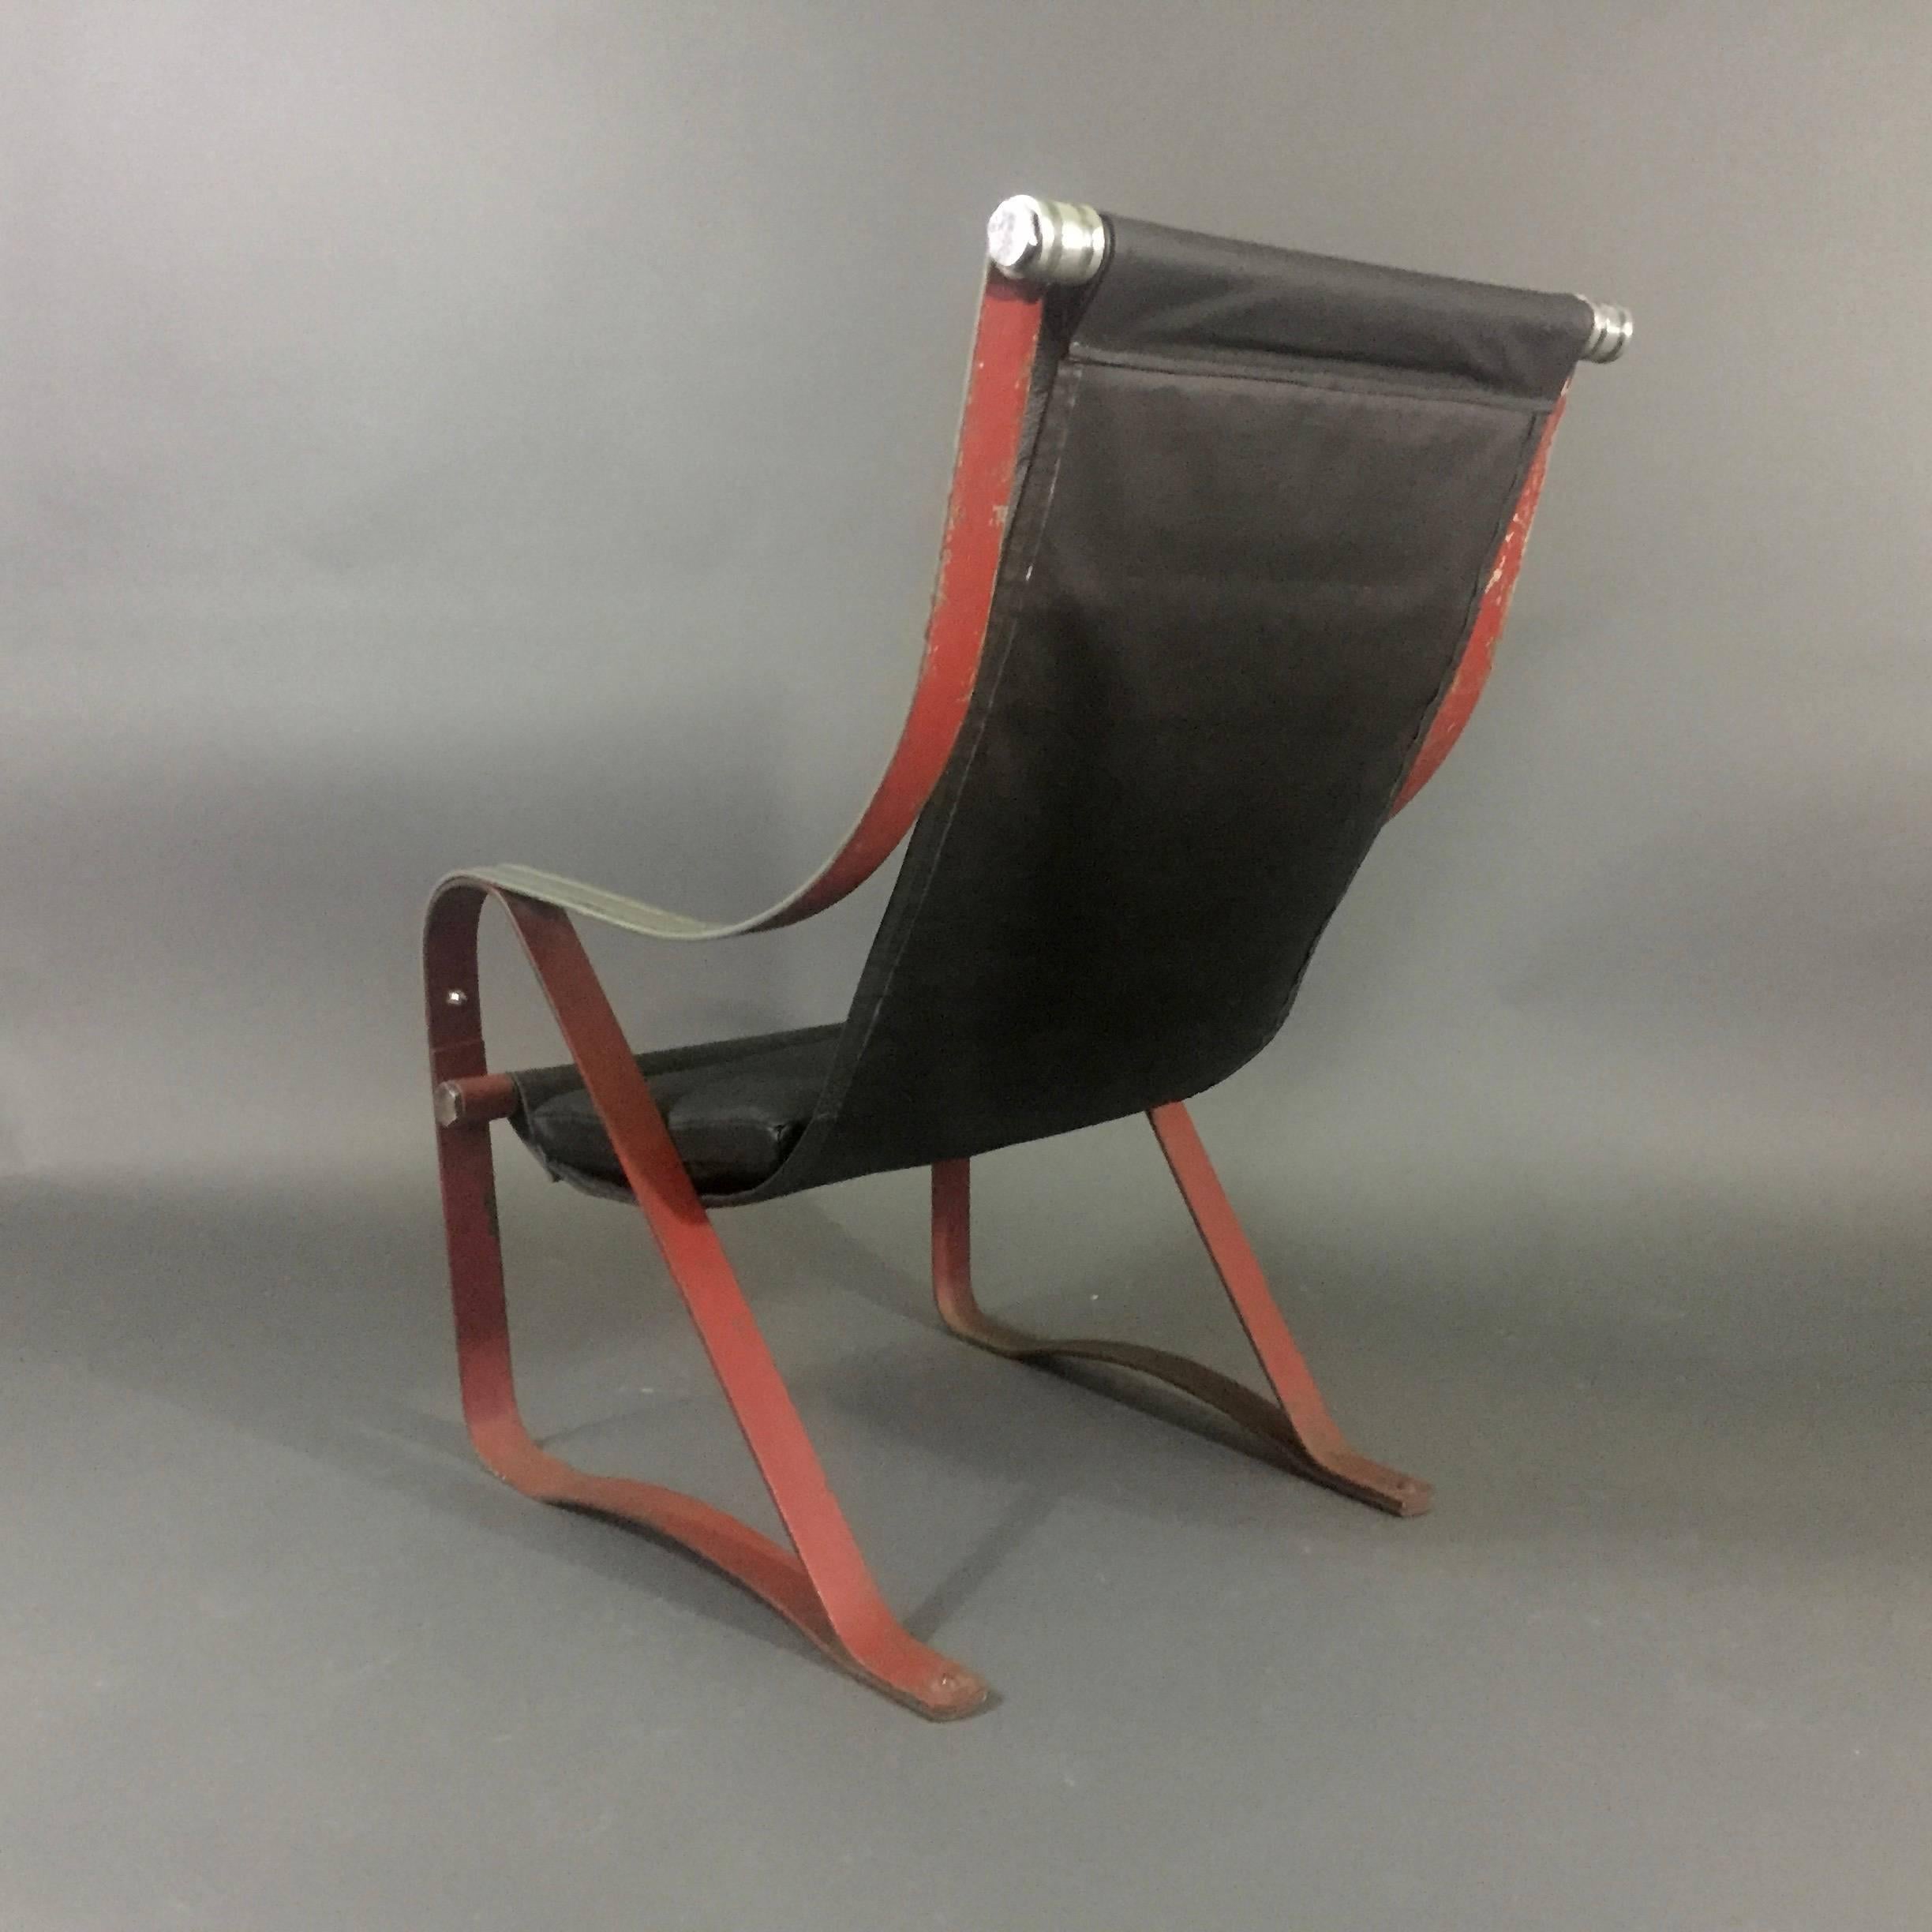 American McKay Craft Sling Chair, Leather and Steel, 1930s For Sale